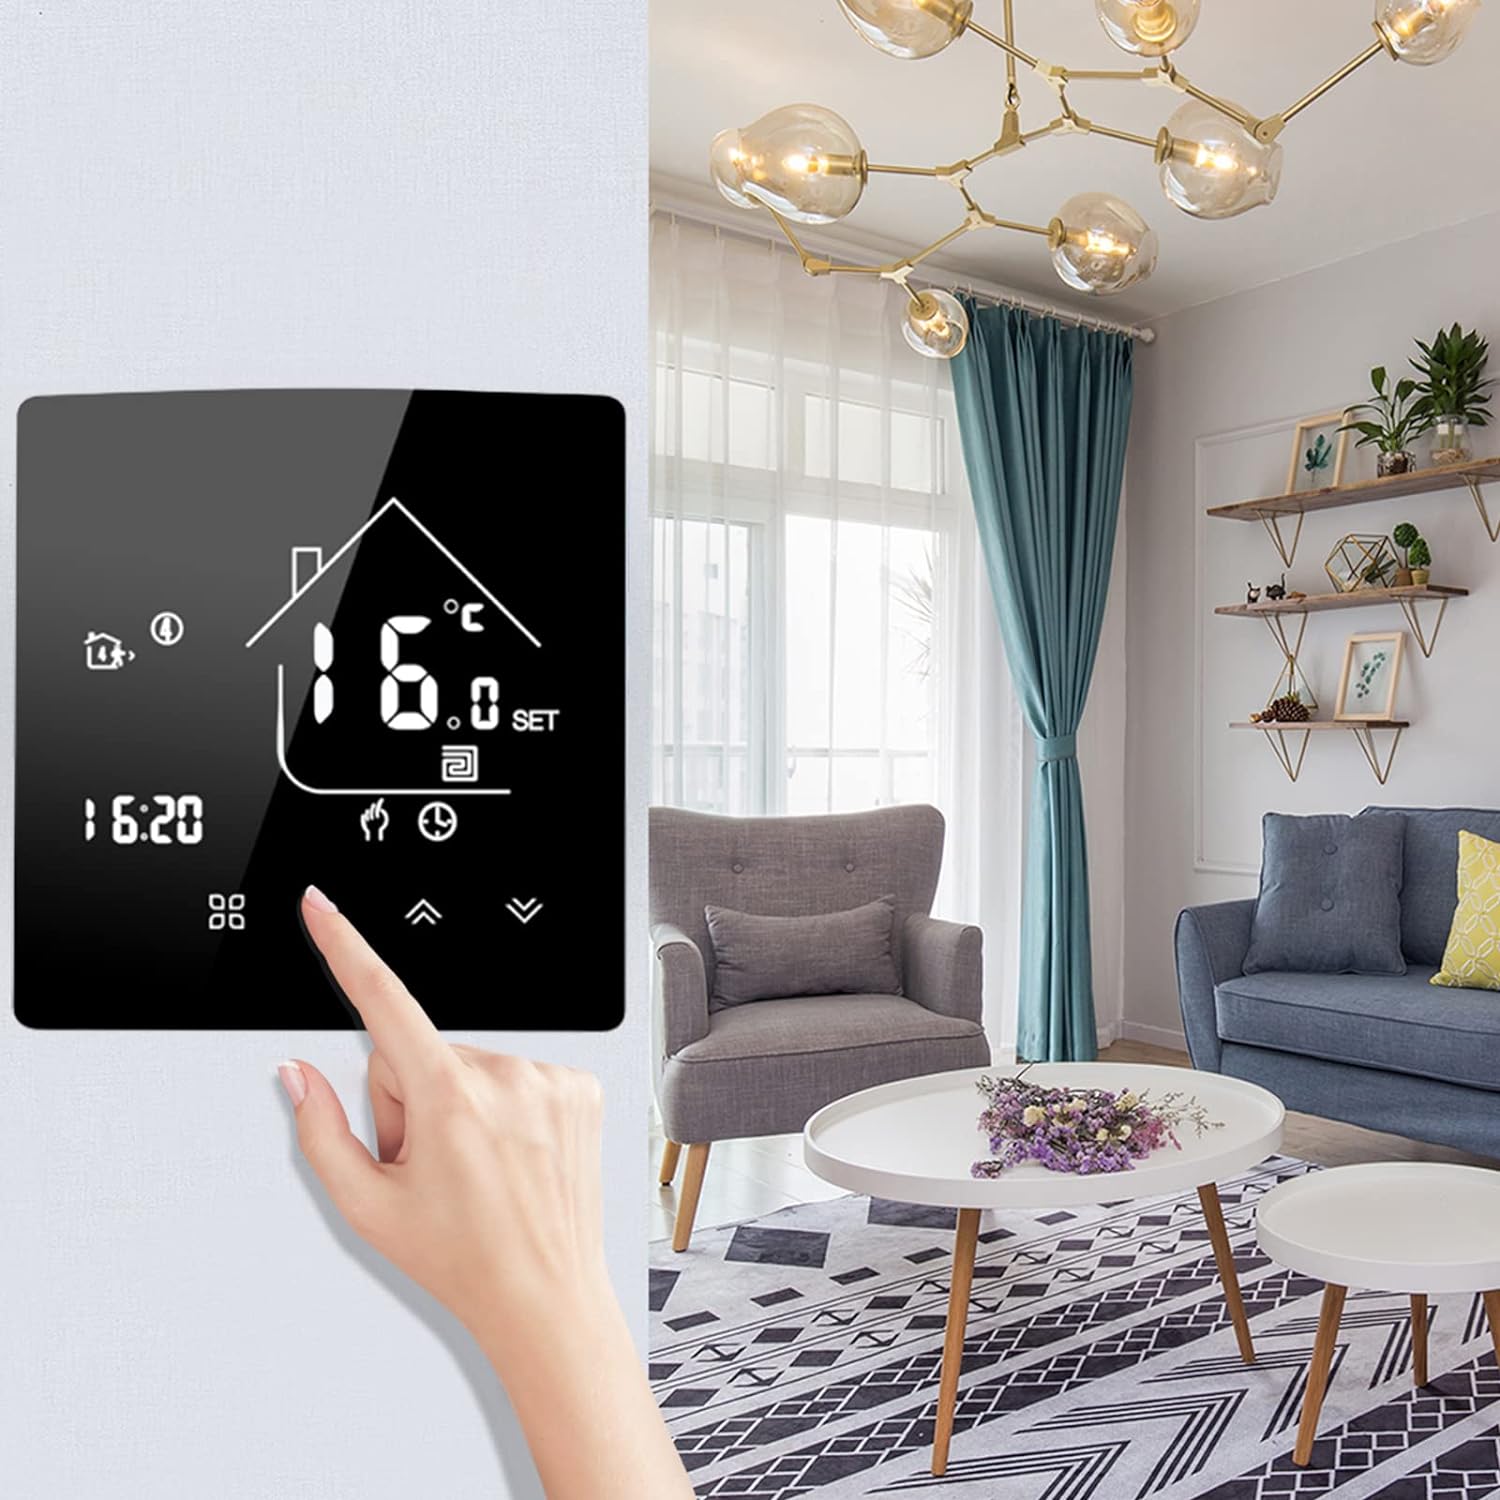 Thermostat Smart Thermostat Energy Saving Room ThermostatProgrammable Thermostat with Touch Screen Digital (#3Touch Screen Water heating 3A) - Amazing Gadgets Outlet